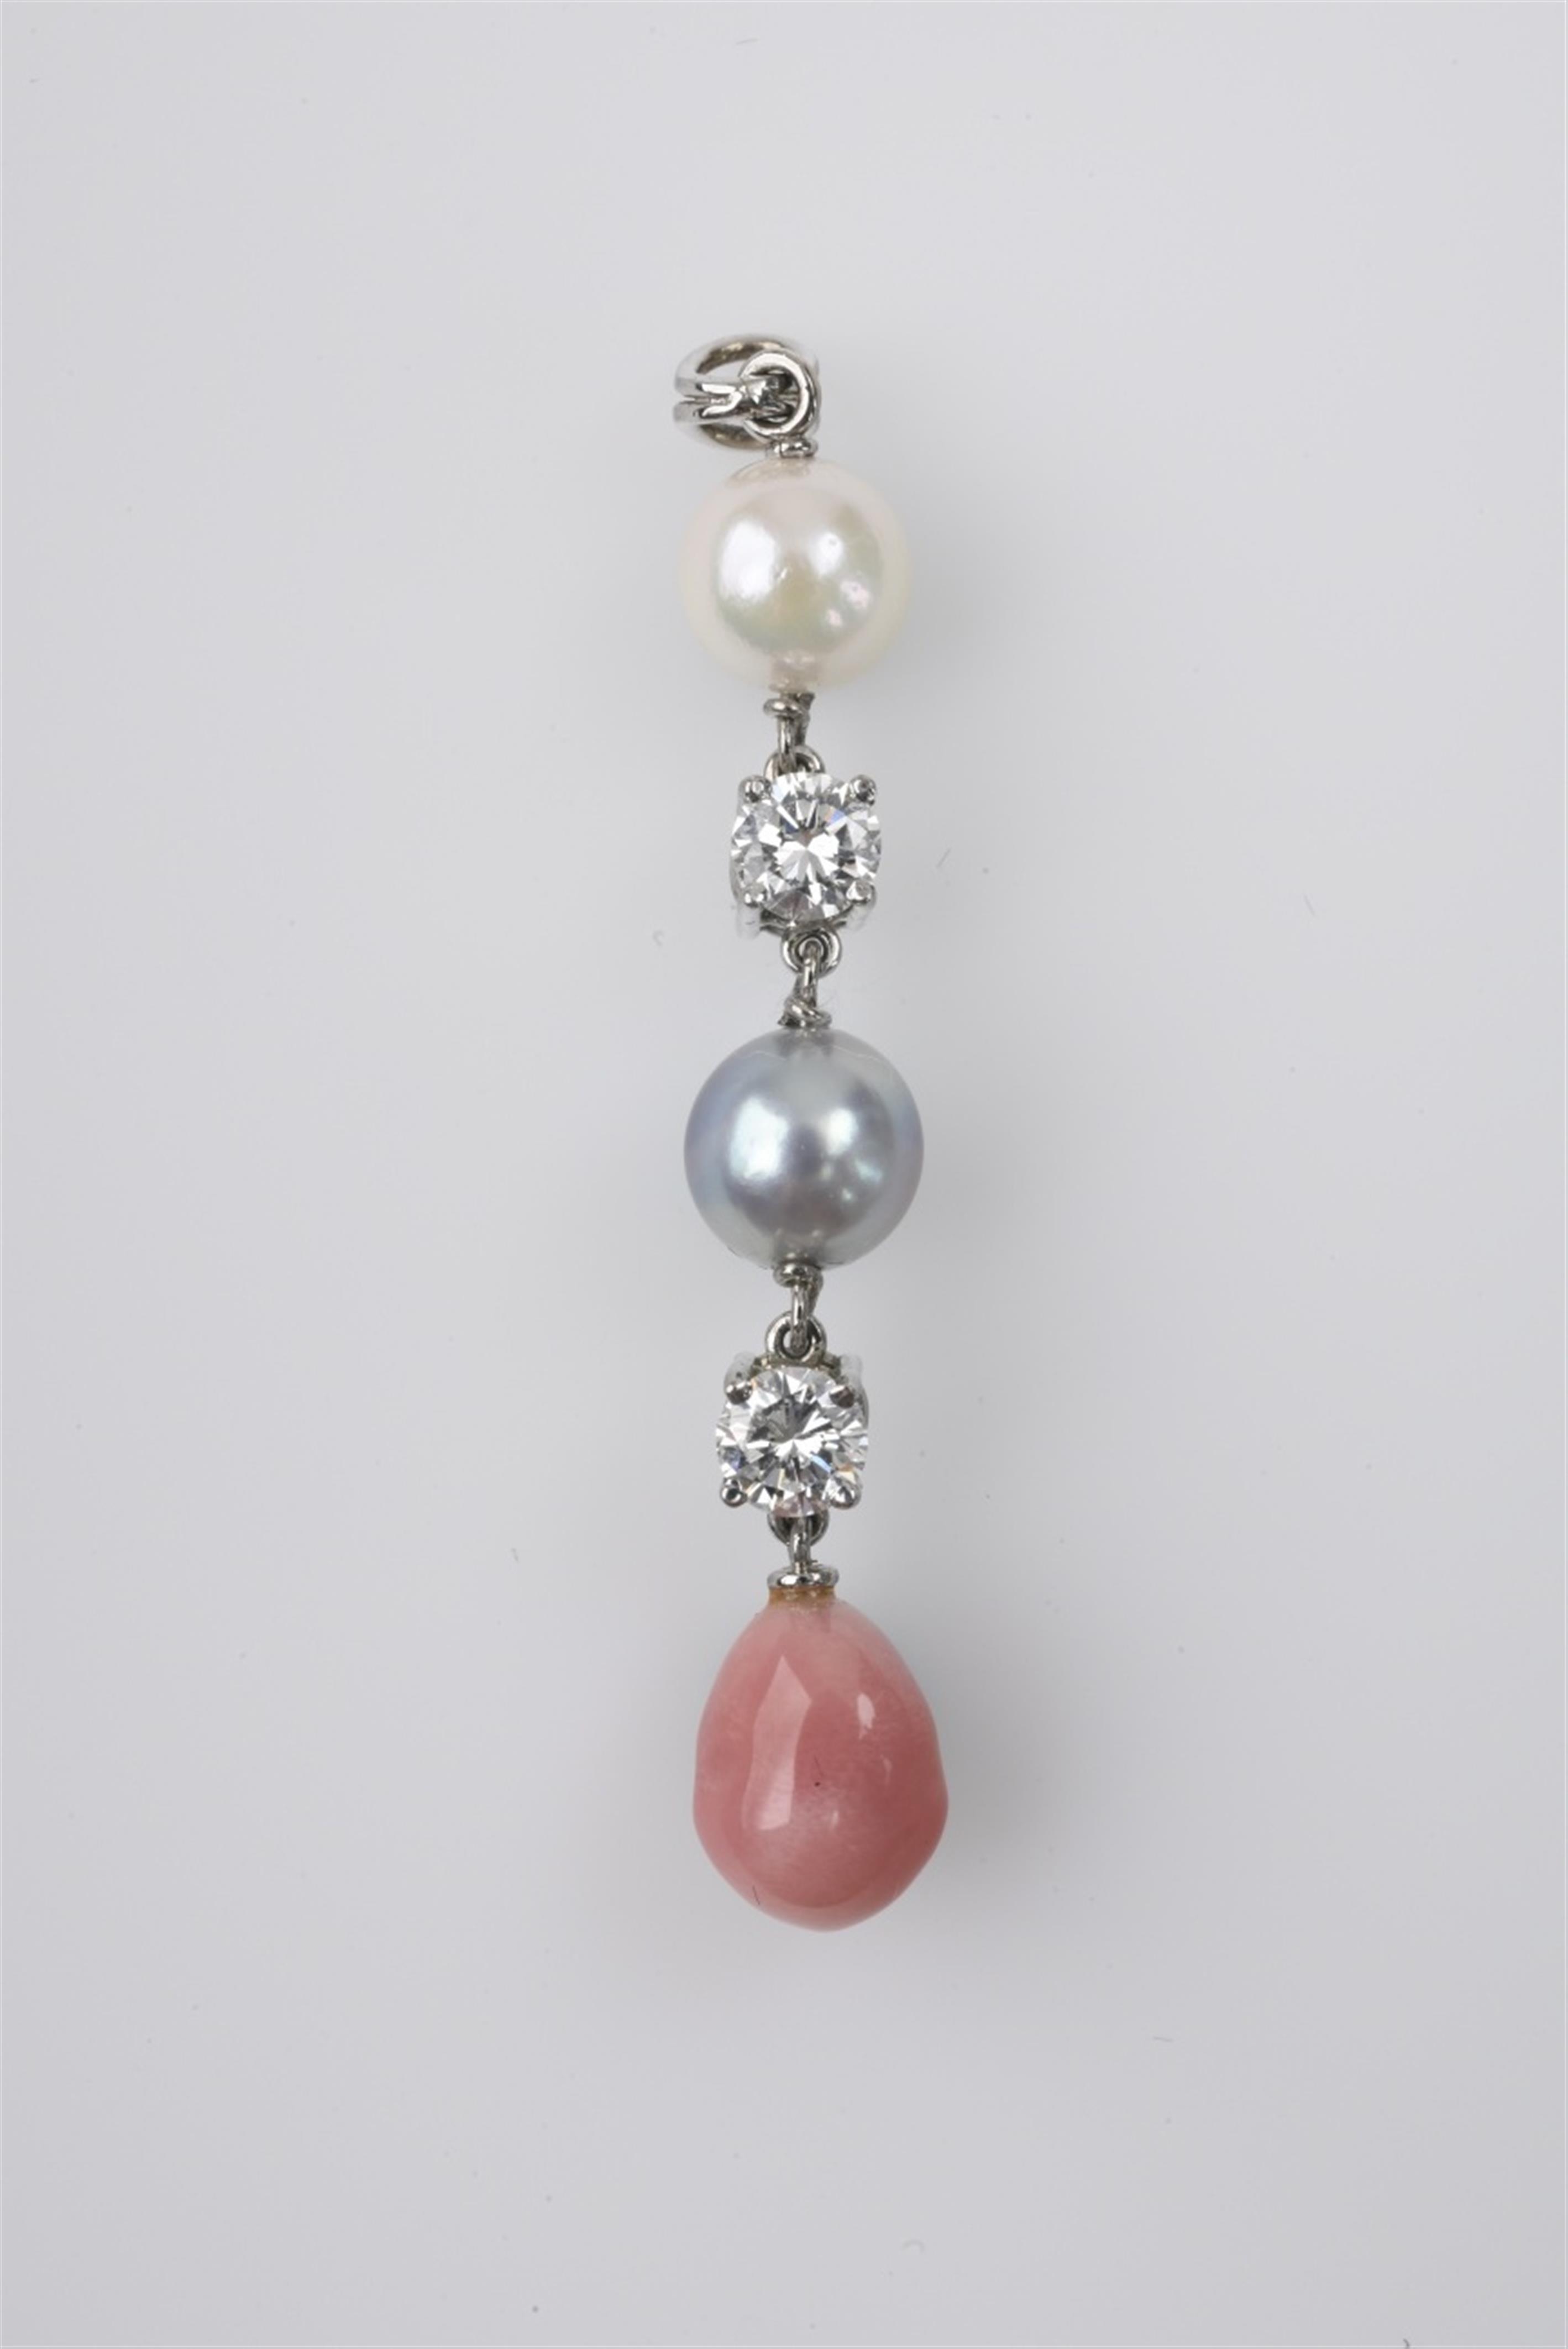 A 18k white gold pendant with a conch pearl - image-1